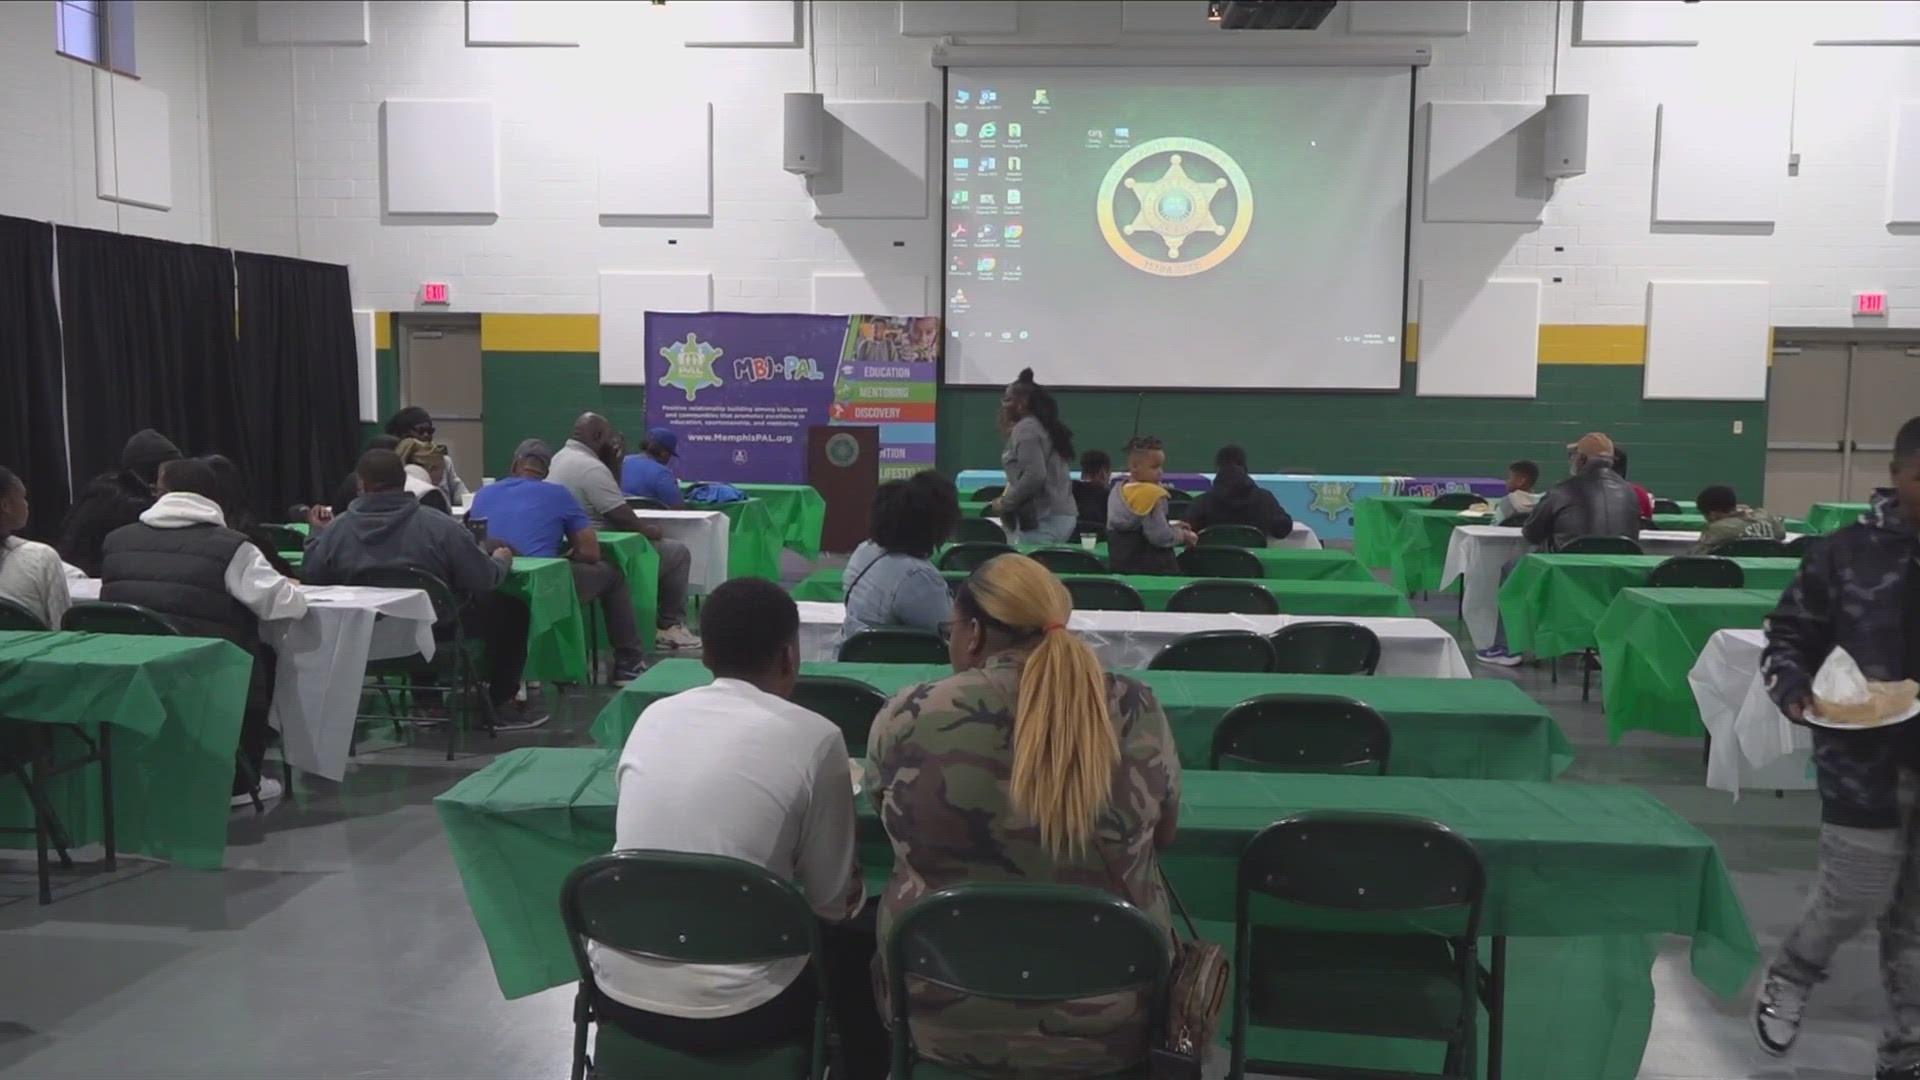 In response to a rise in youth gun violence in Memphis, a group of current and former law enforcement officers held a "Youth Cease Fire Summit" on Saturday, Dec. 16.